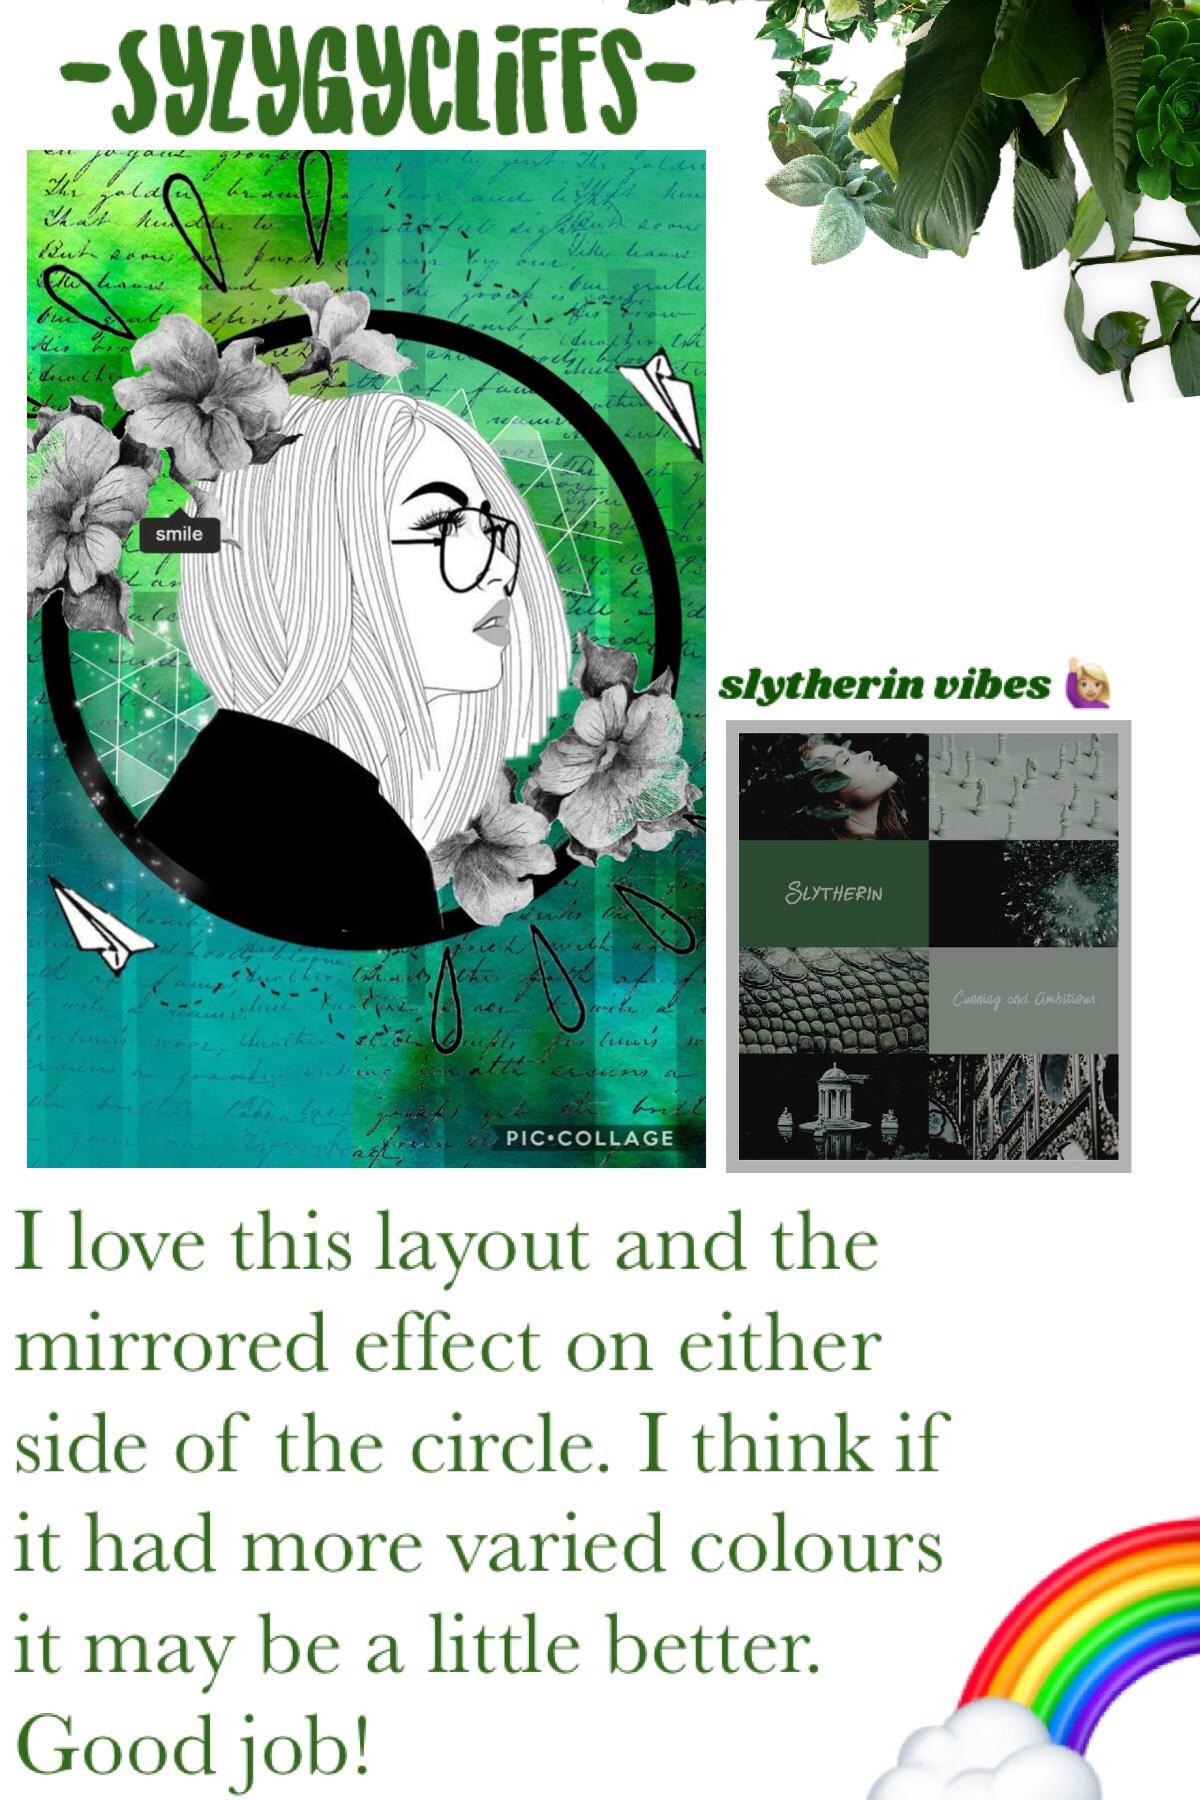 🌈TAP🌈
I’m getting a loaddd of slytherin vibes from this 🙋🏼‍♀️ anyone else?

•- fave collage 
•- -SyzygyCliffs-